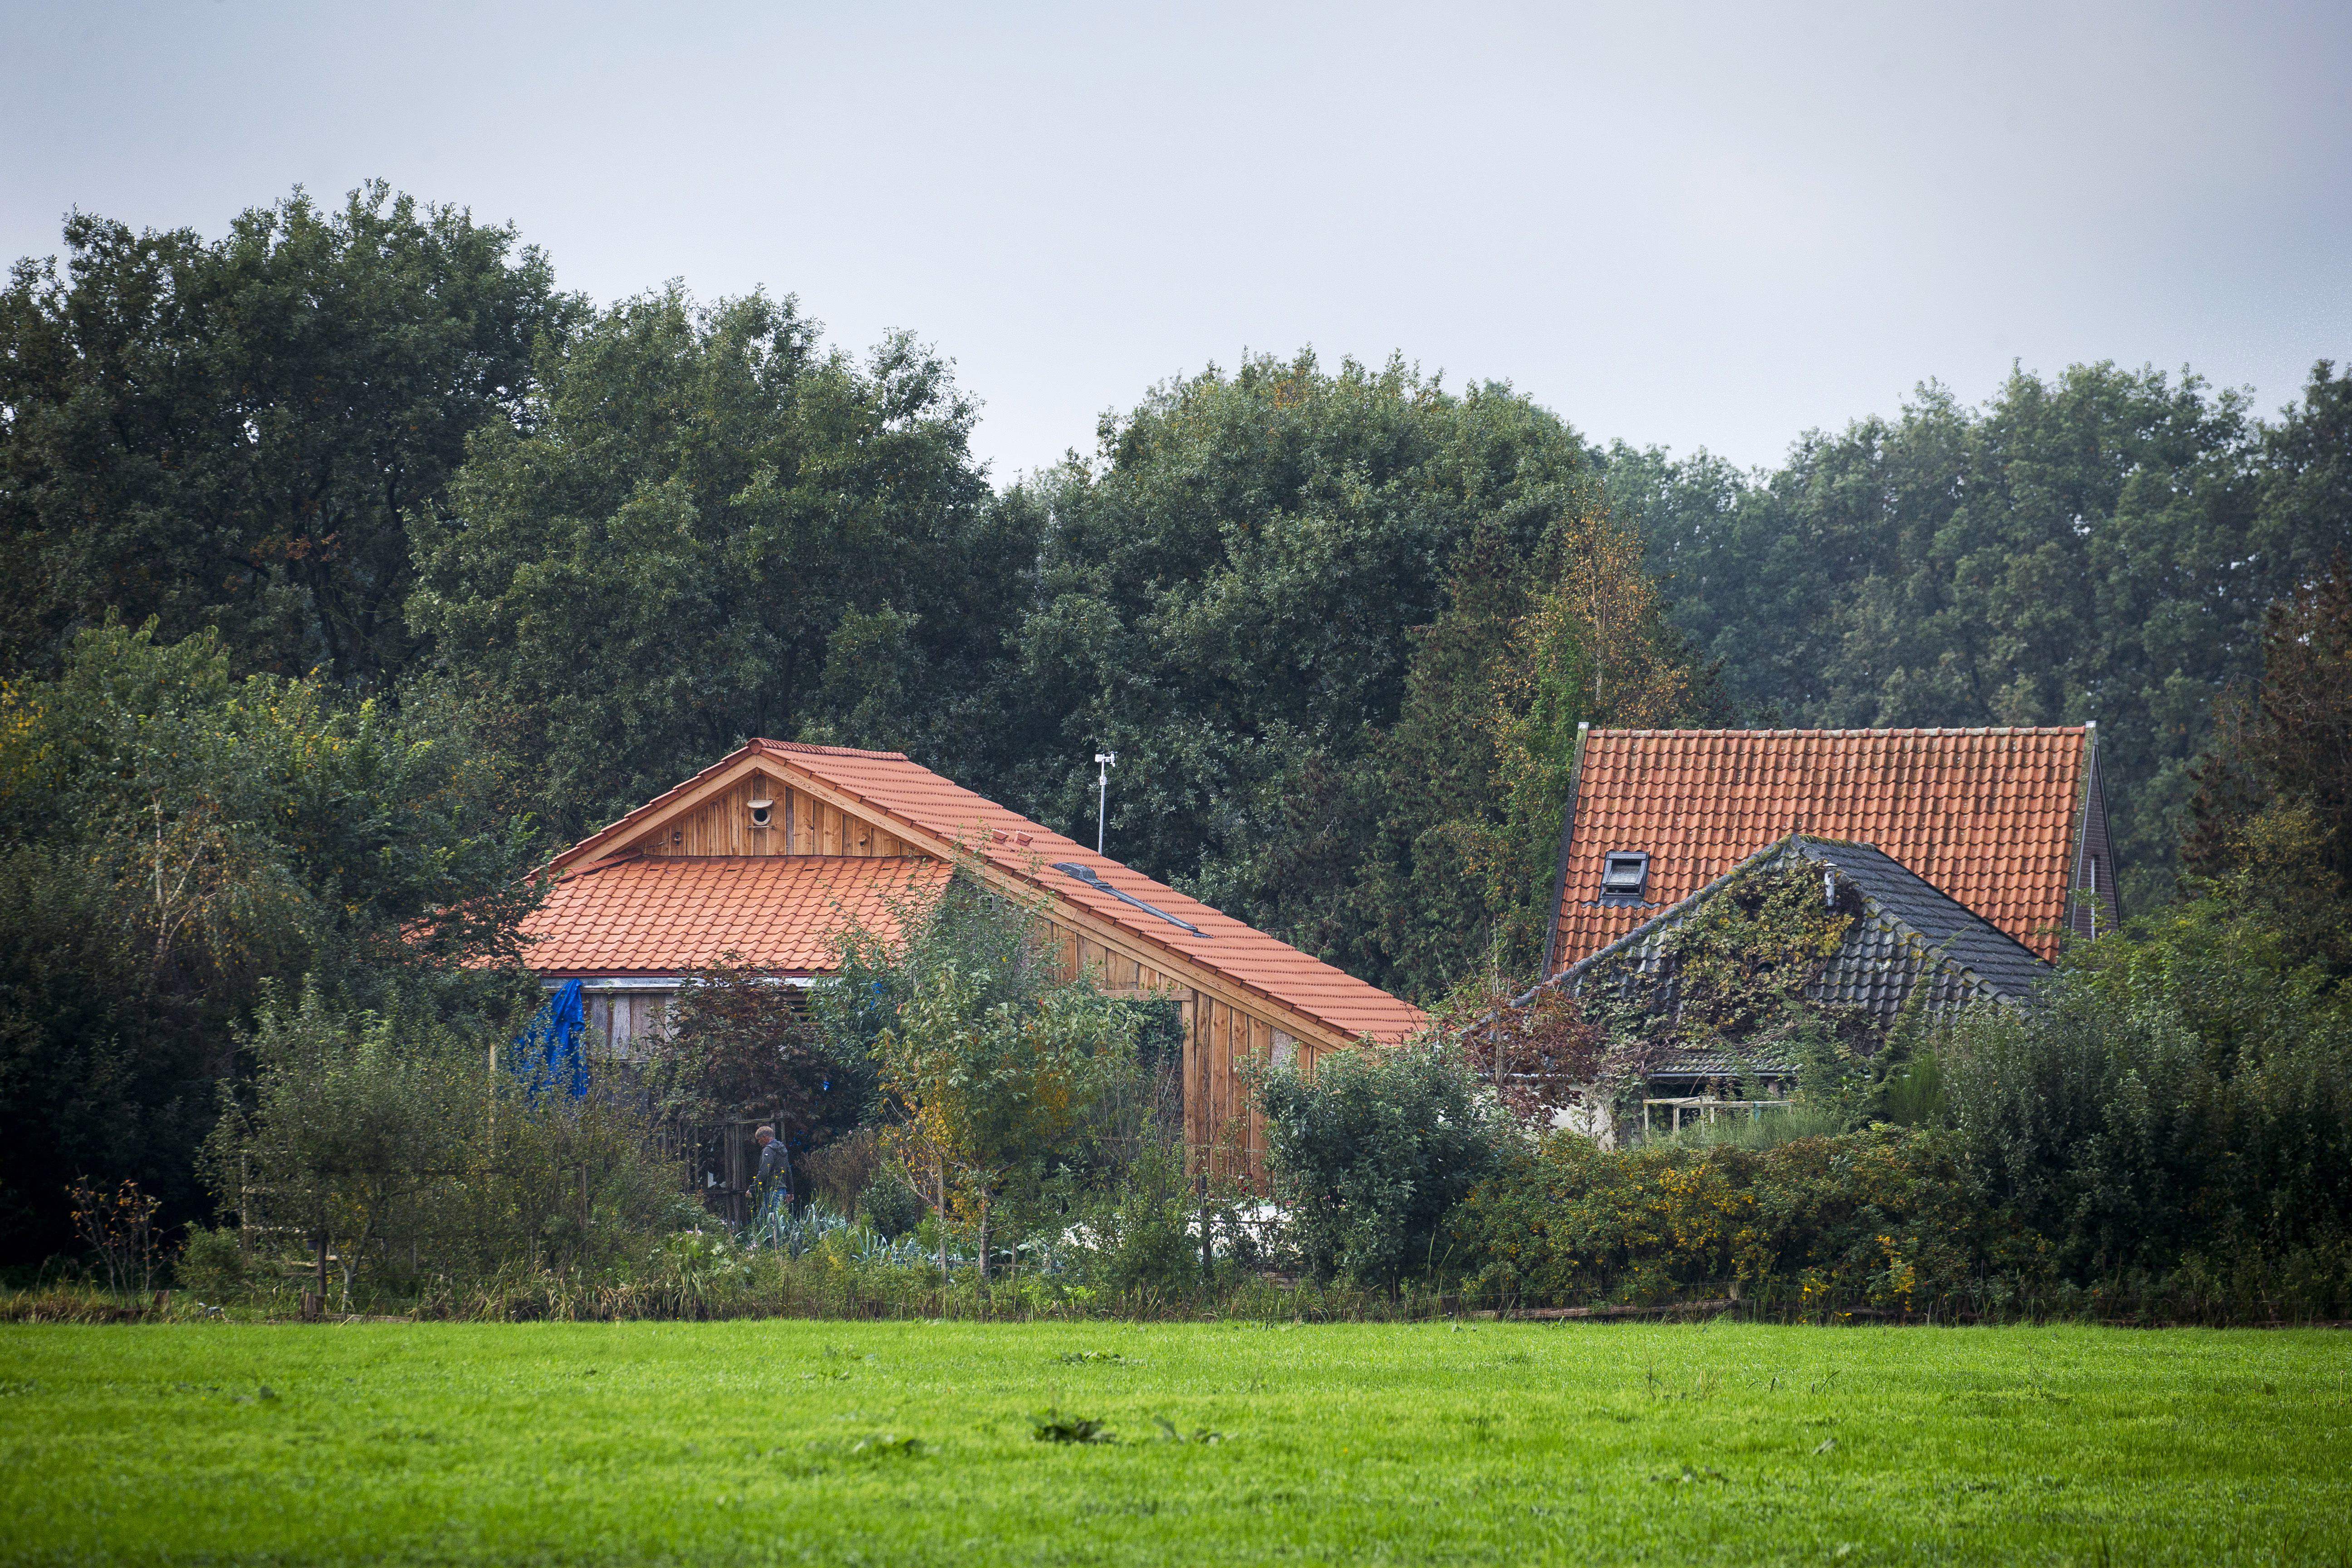 A plain clothes policeman inspects the farmhouse in a remote area of northern Netherlands' province of Drenthe, near the village of Ruinerwold, on October 16, 2019 a day after Dutch police discovered a hidden staircase behind a cupboard leading to a cellar where a man and five others believed to be his children aged between 18 and 25 were hidden and reportedly spent years "waiting for the end of time", officials said. - Local media said the family were found after one of the sons went to a nearby pub in a confused state, drank five beers and then asked for help, saying he had not been outside for nine years. Police arrested a 58-year-old man at the scene for failing to cooperate with the investigation, but he was not the father. Many questions were unanswered and police are investigating "All scenarios". "At this point we cannot give further information," local police said. (Photo by VINCENT JANNINK/ANP/AFP via Getty Images)